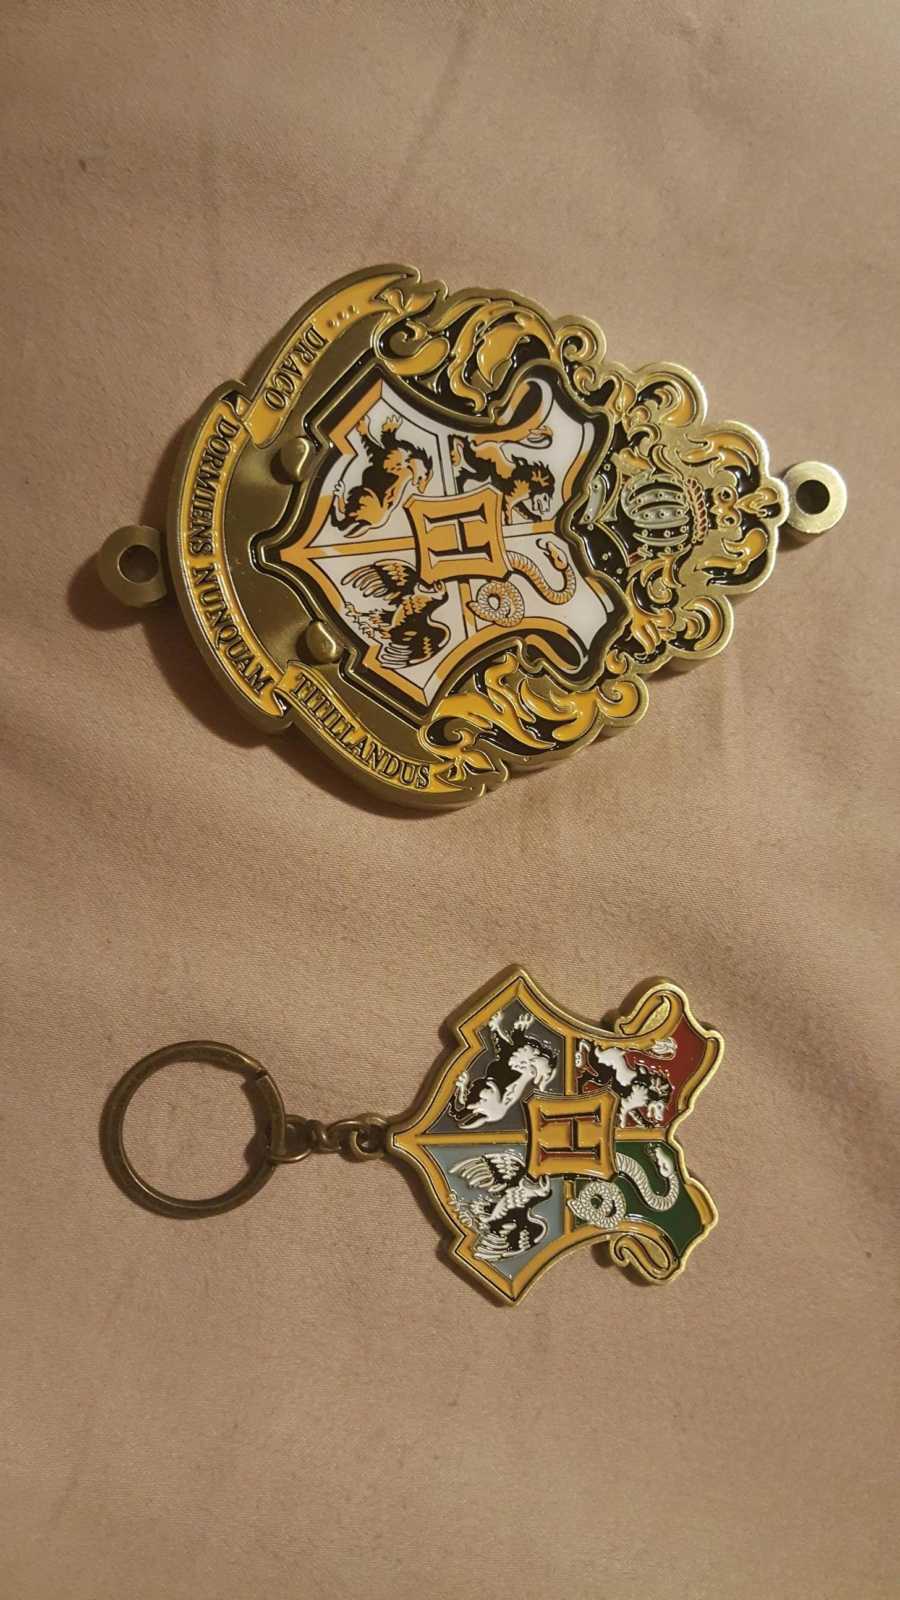 Keychain and medallion of Hogwarts crest boyfriend would place on trunk for girlfriend